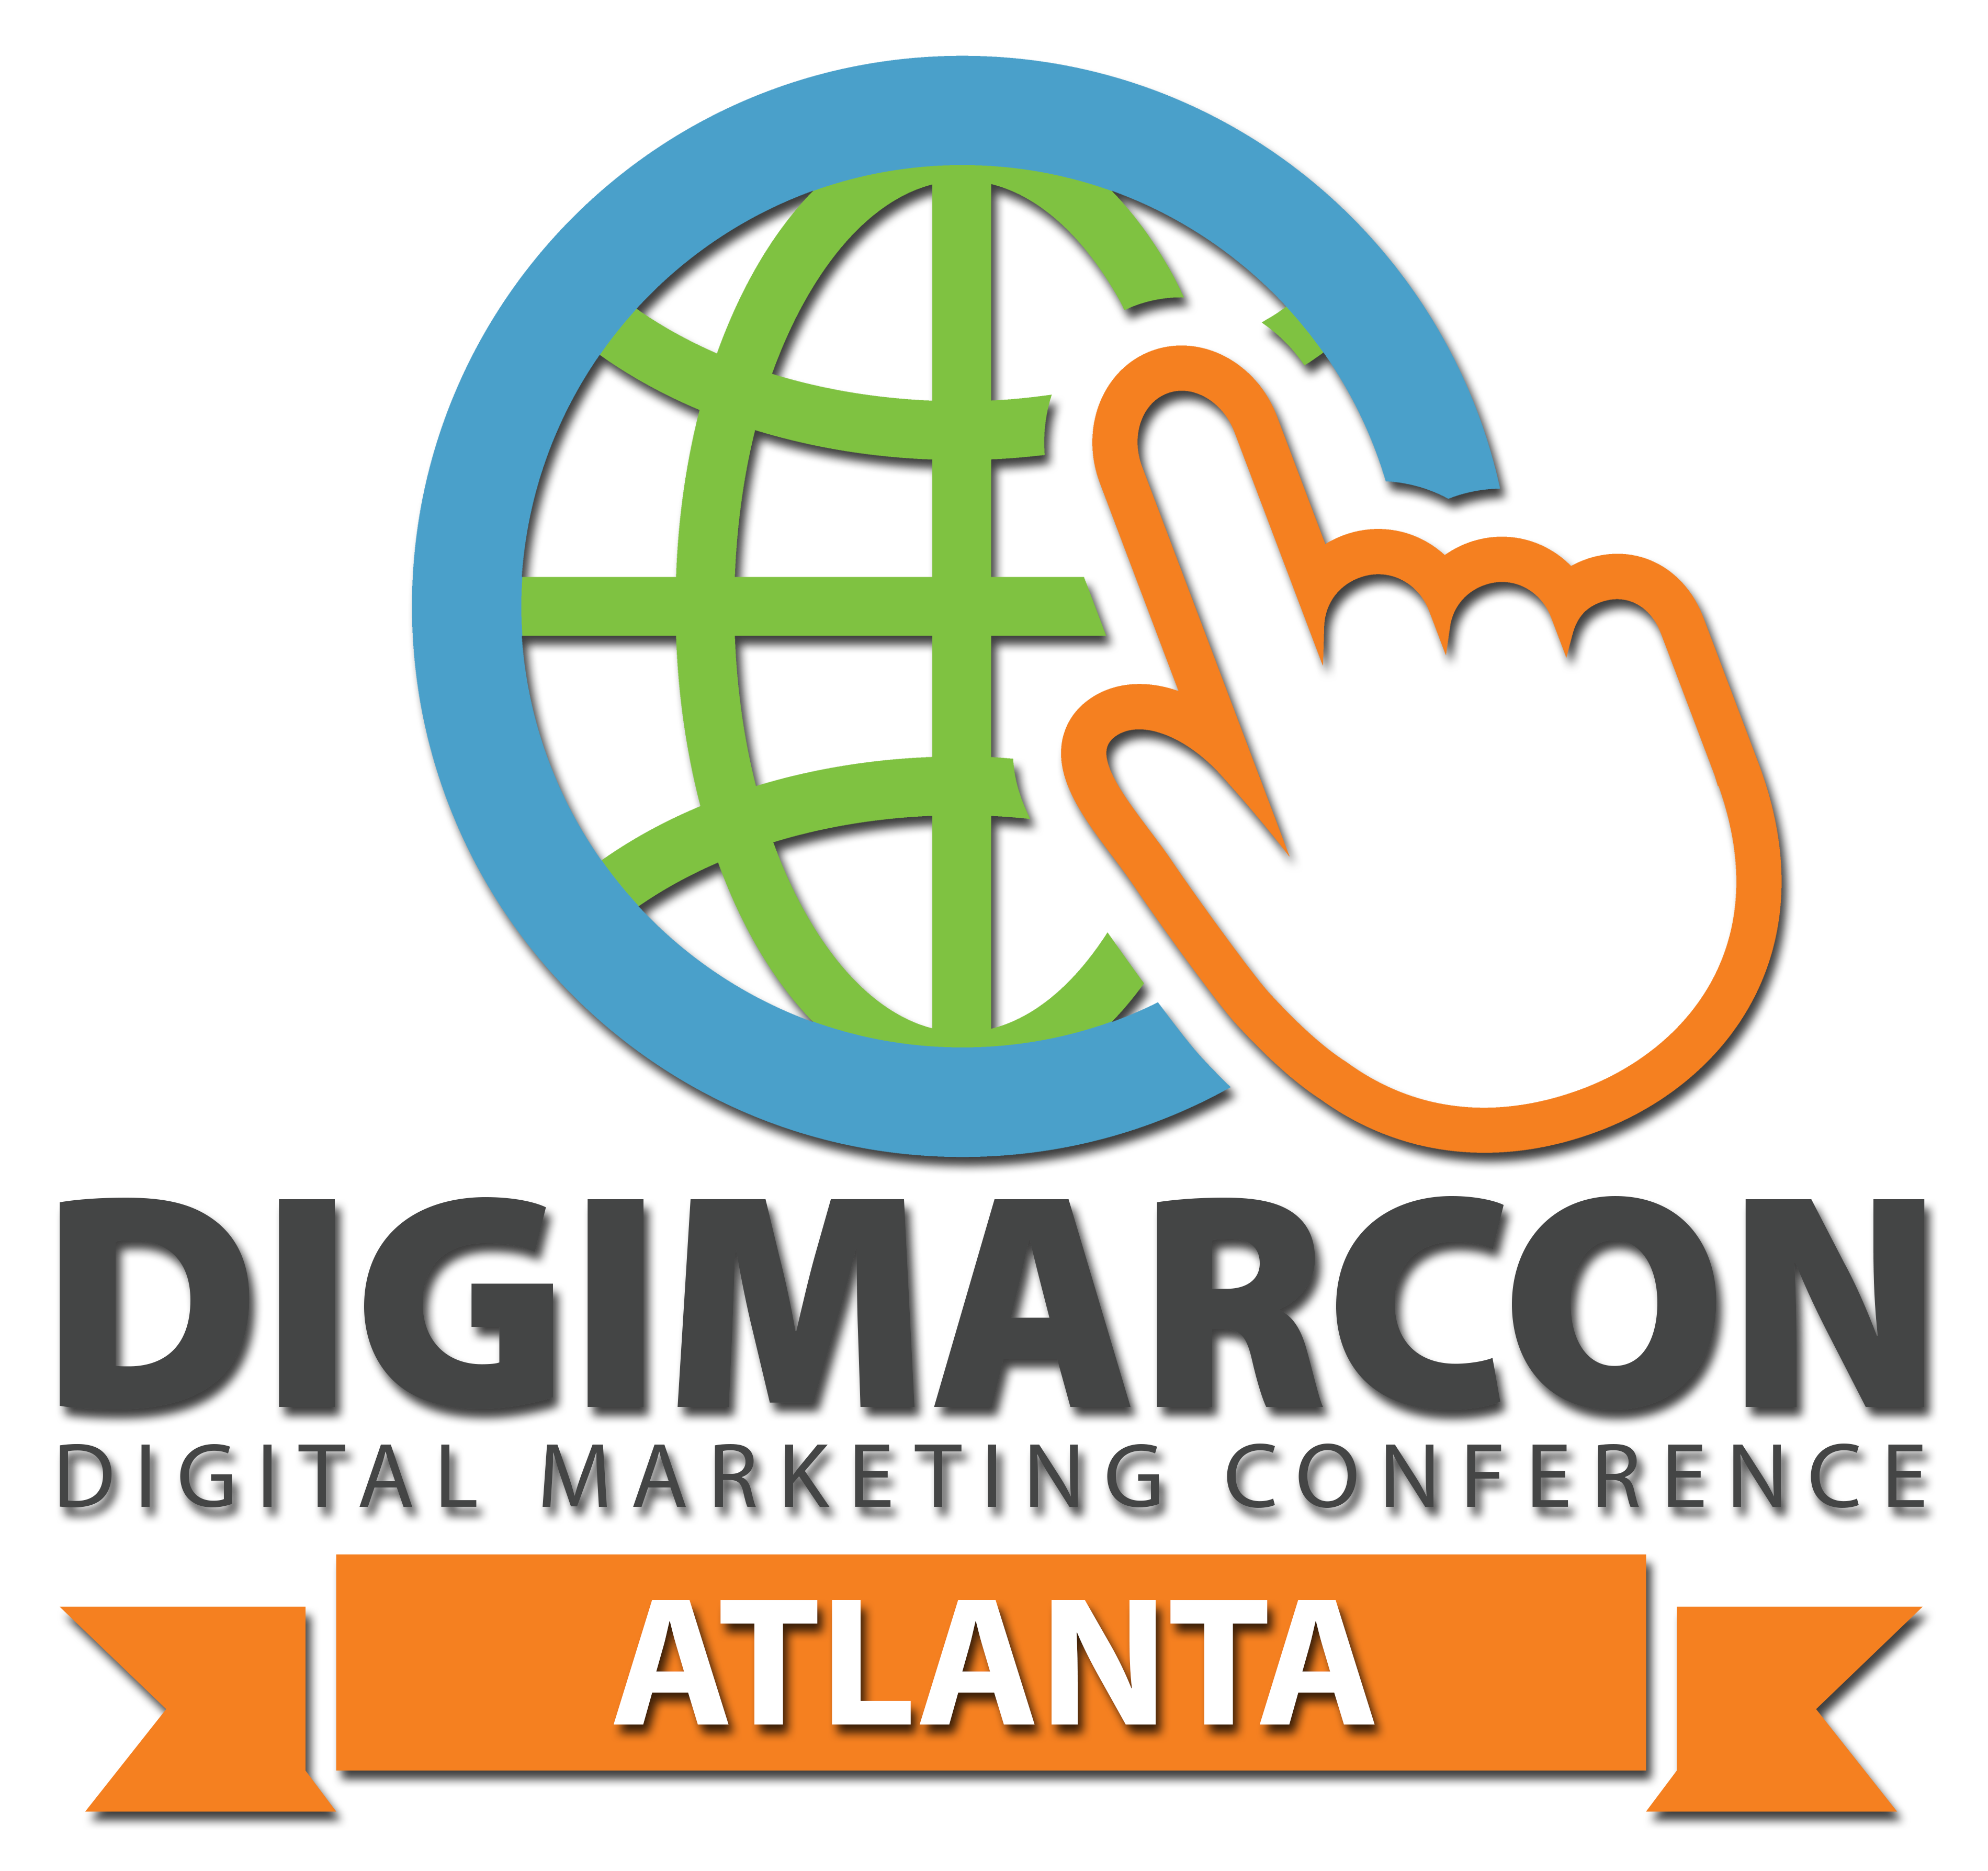 DigiMarCon New England – Digital Marketing, Media and Advertising Conference & Exhibition